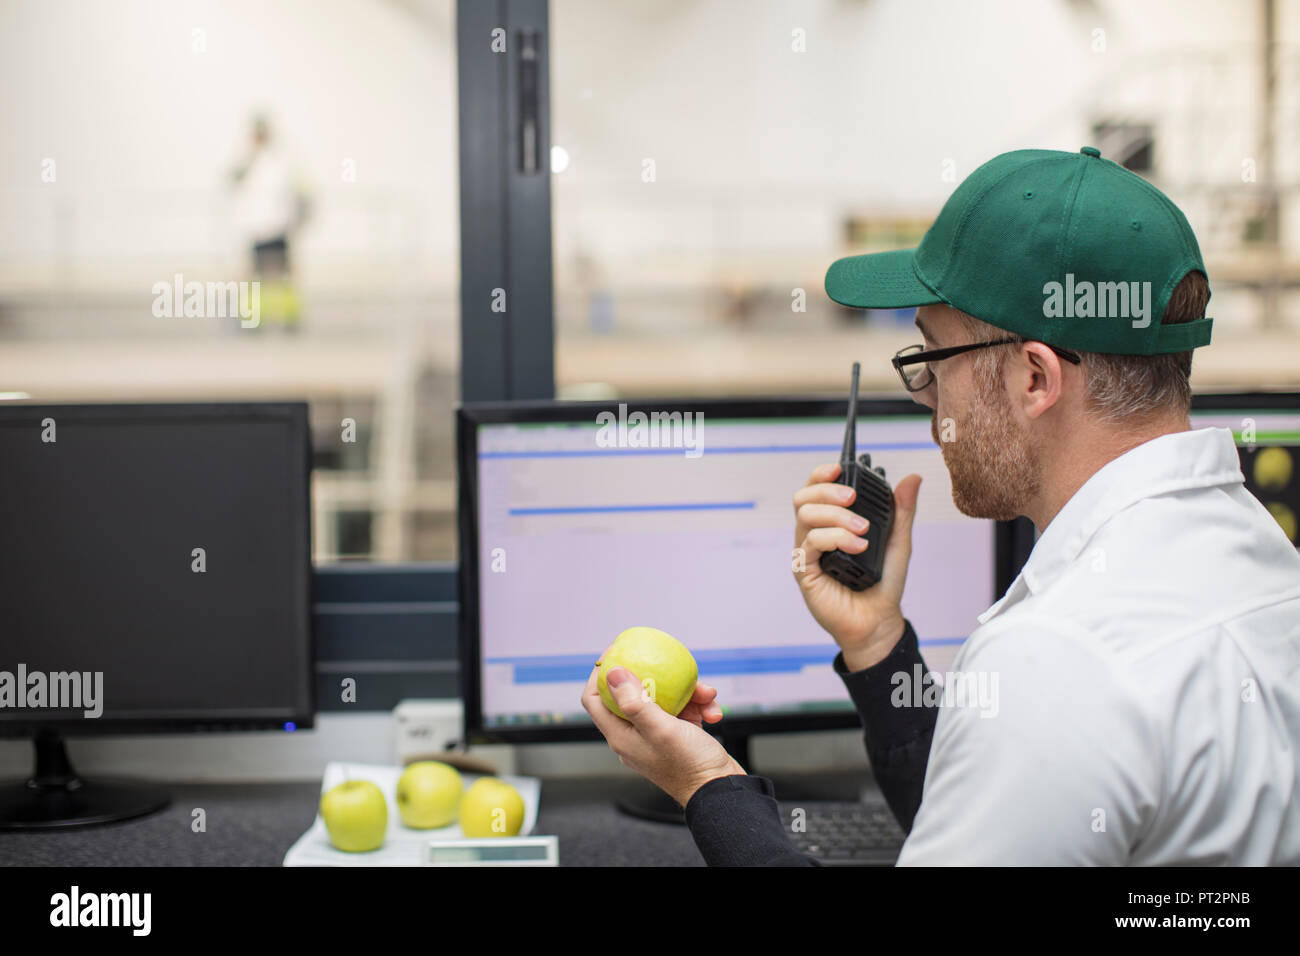 Worker using walkie talkie while working at computer Stock Photo ...